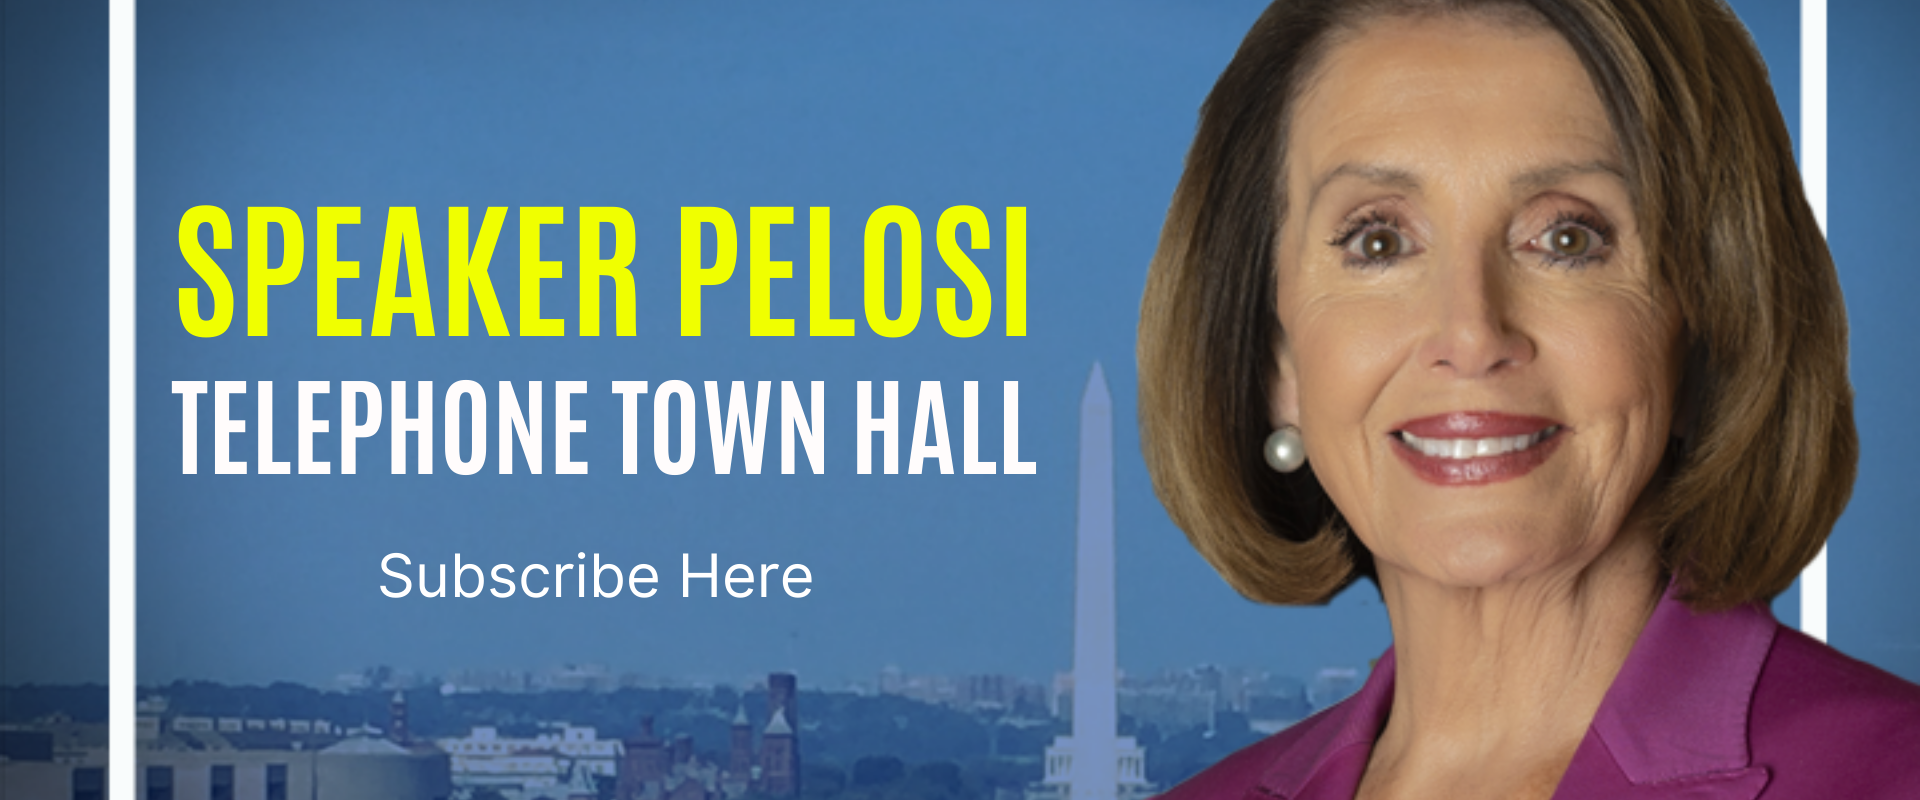 Subscribe to Pelosi's Telephone Town Hall